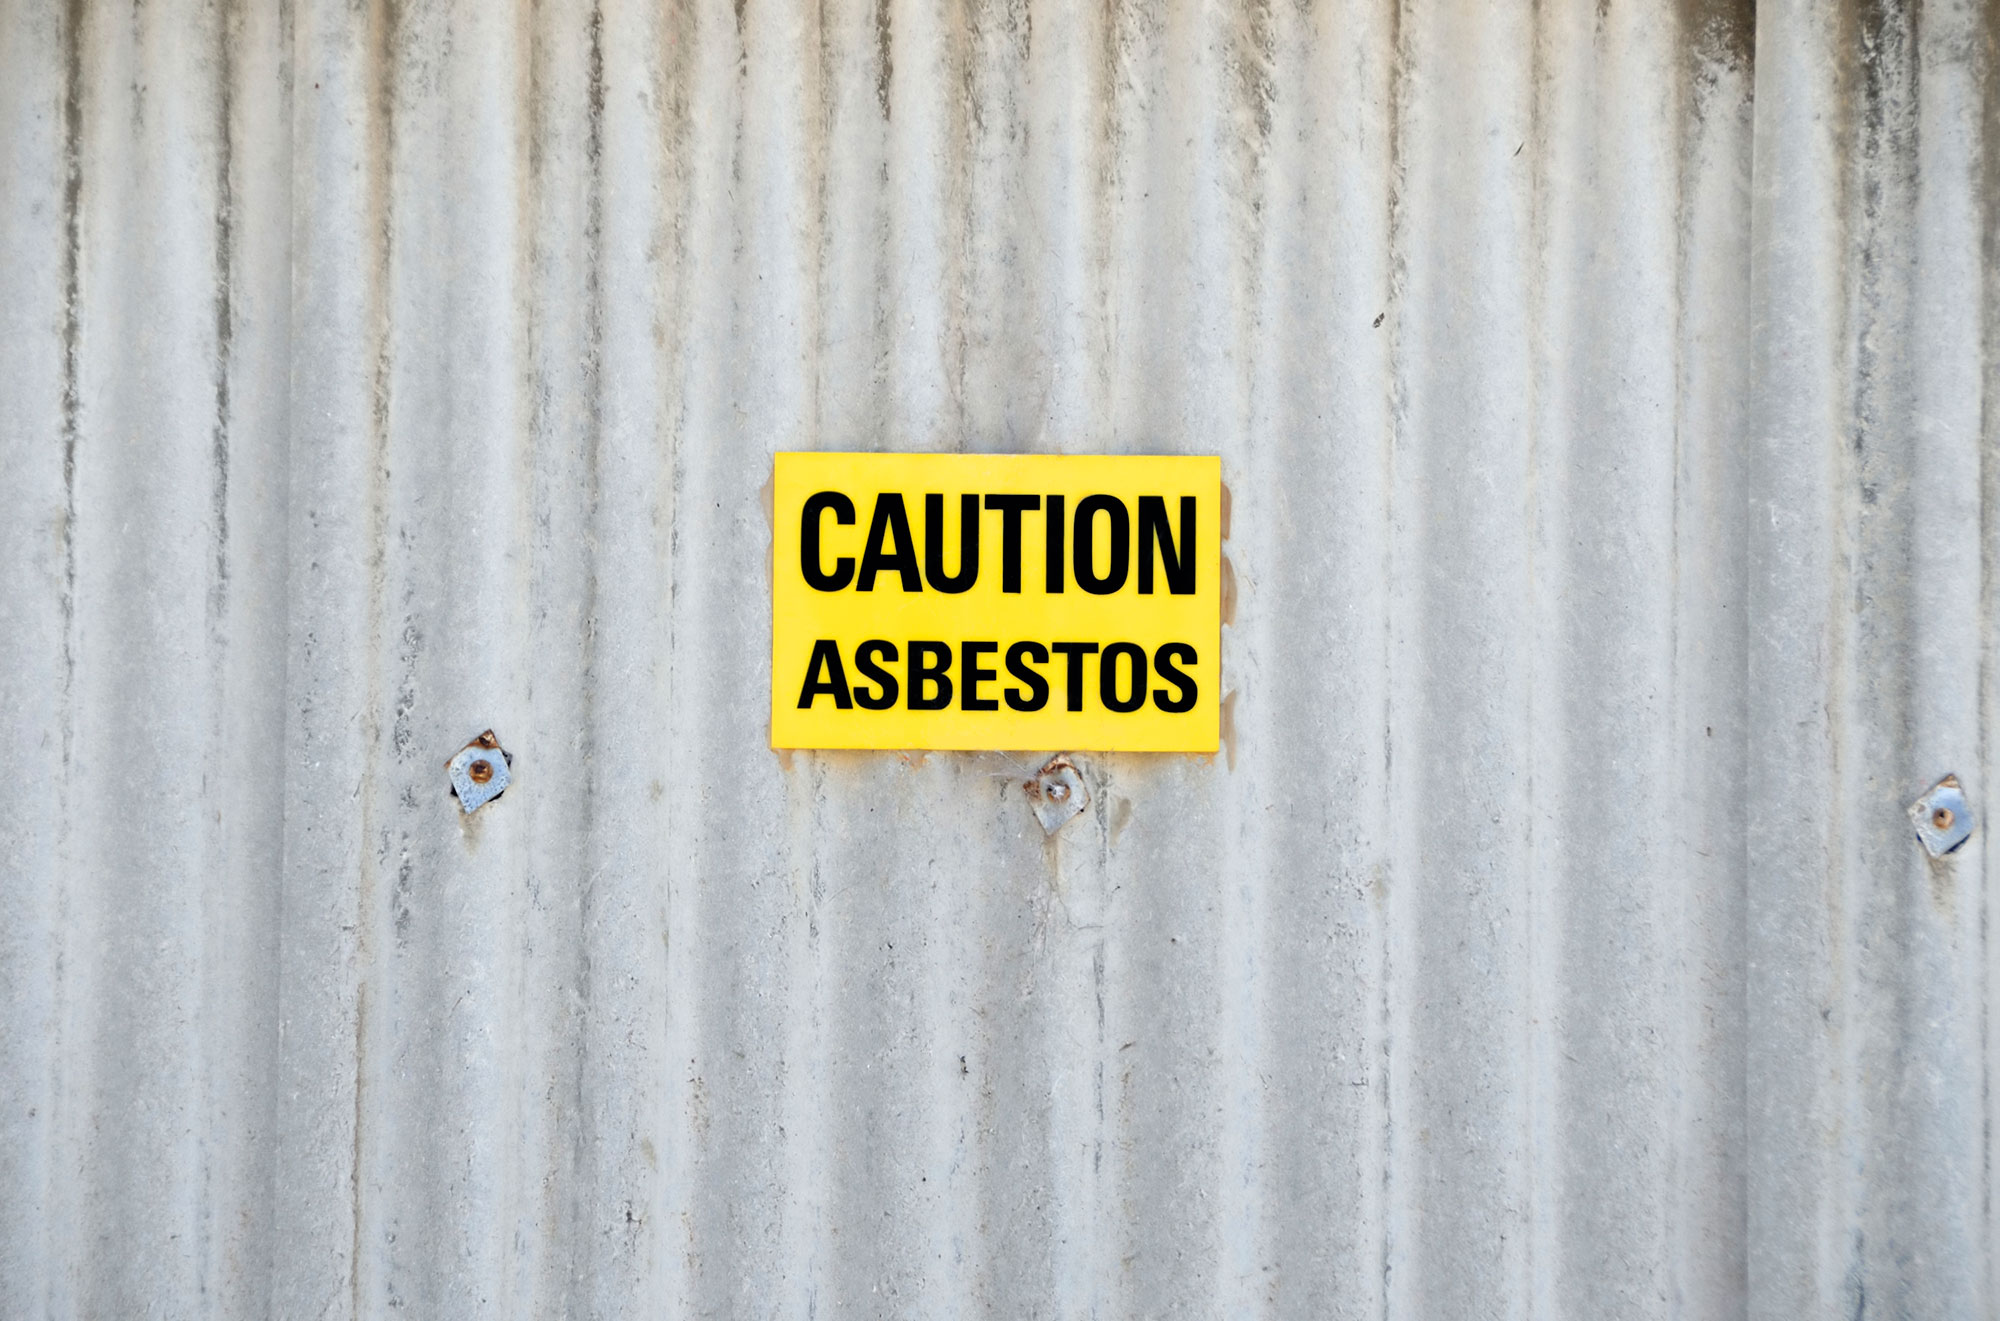 Asbestos Inspection in Newcastle with Warning Sign about danger